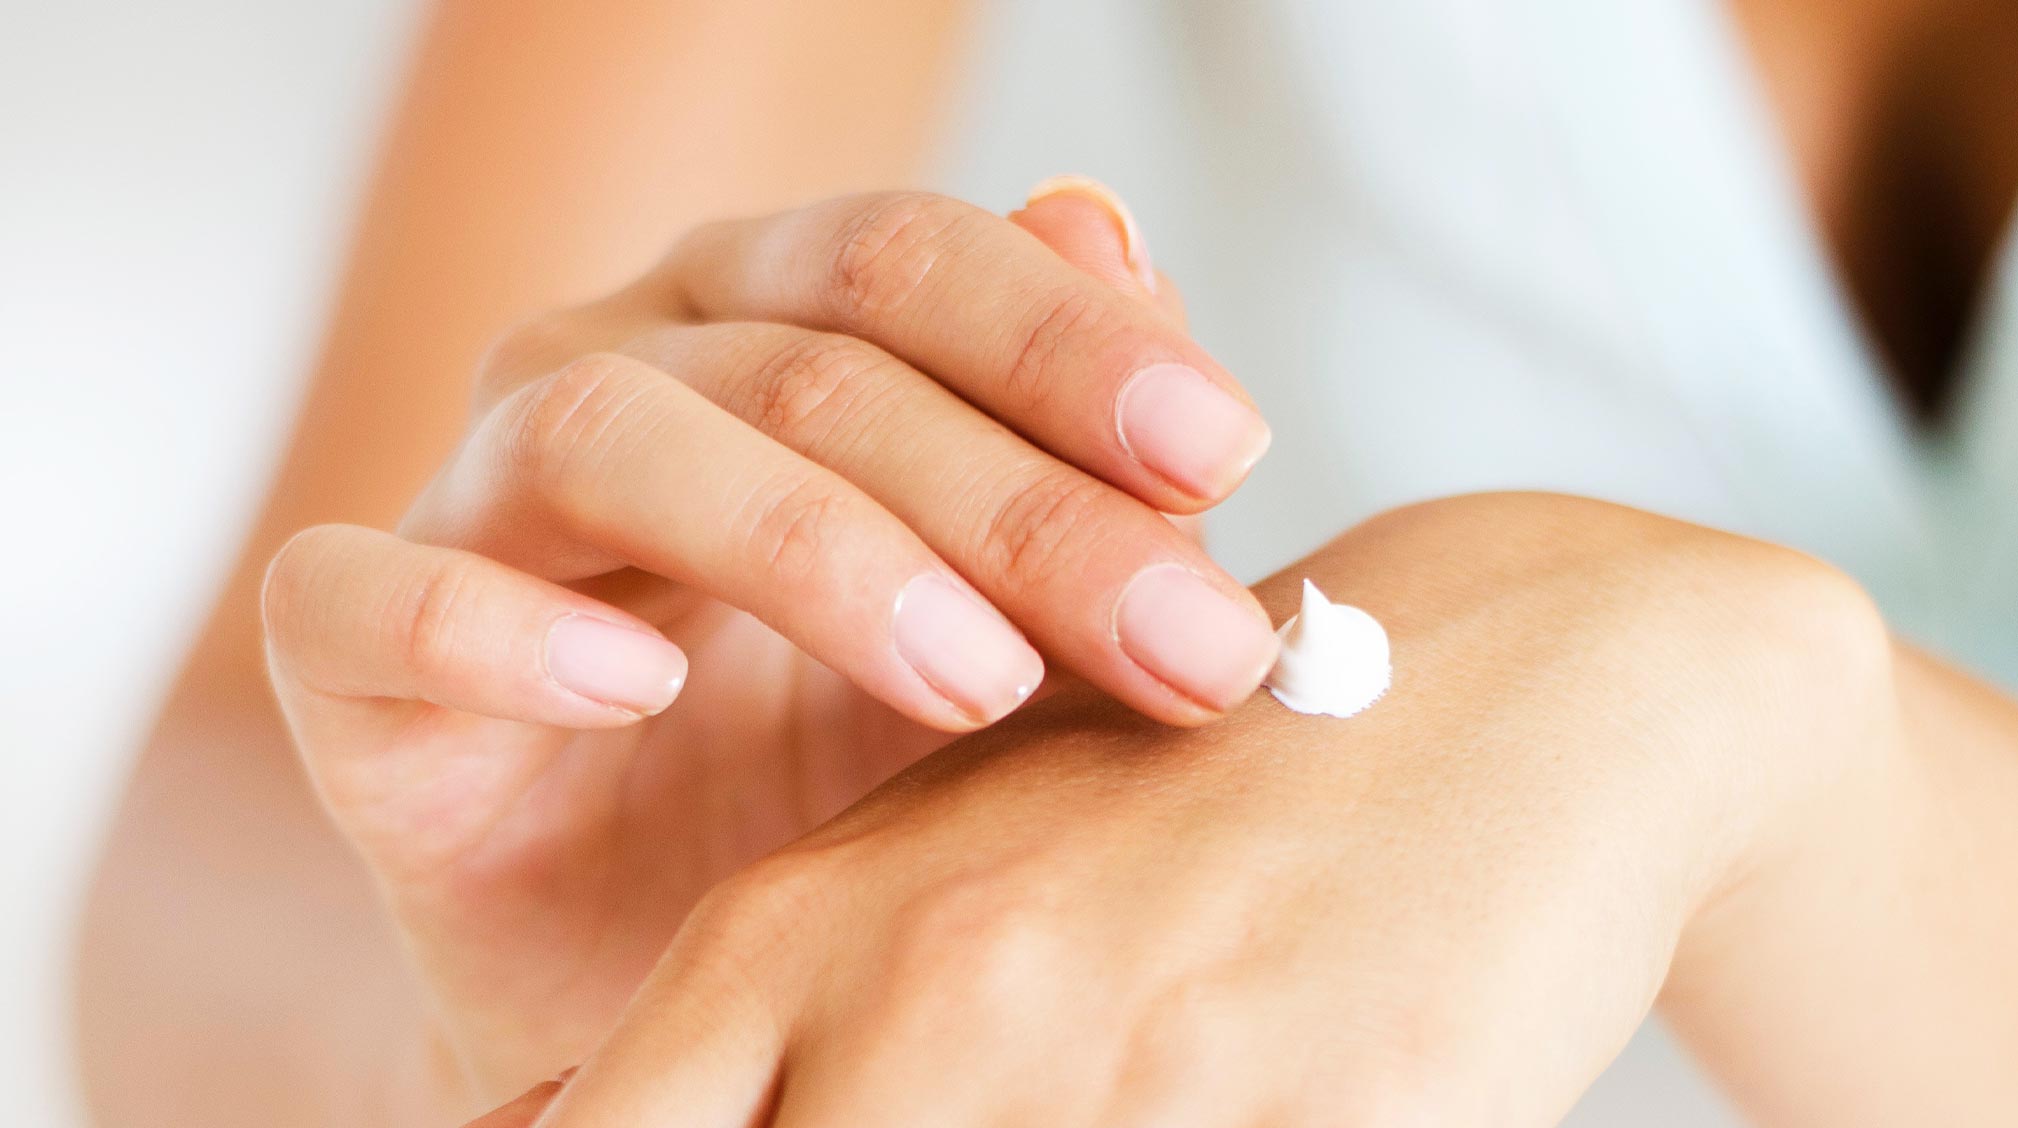 Hands applying mild lotion to skin